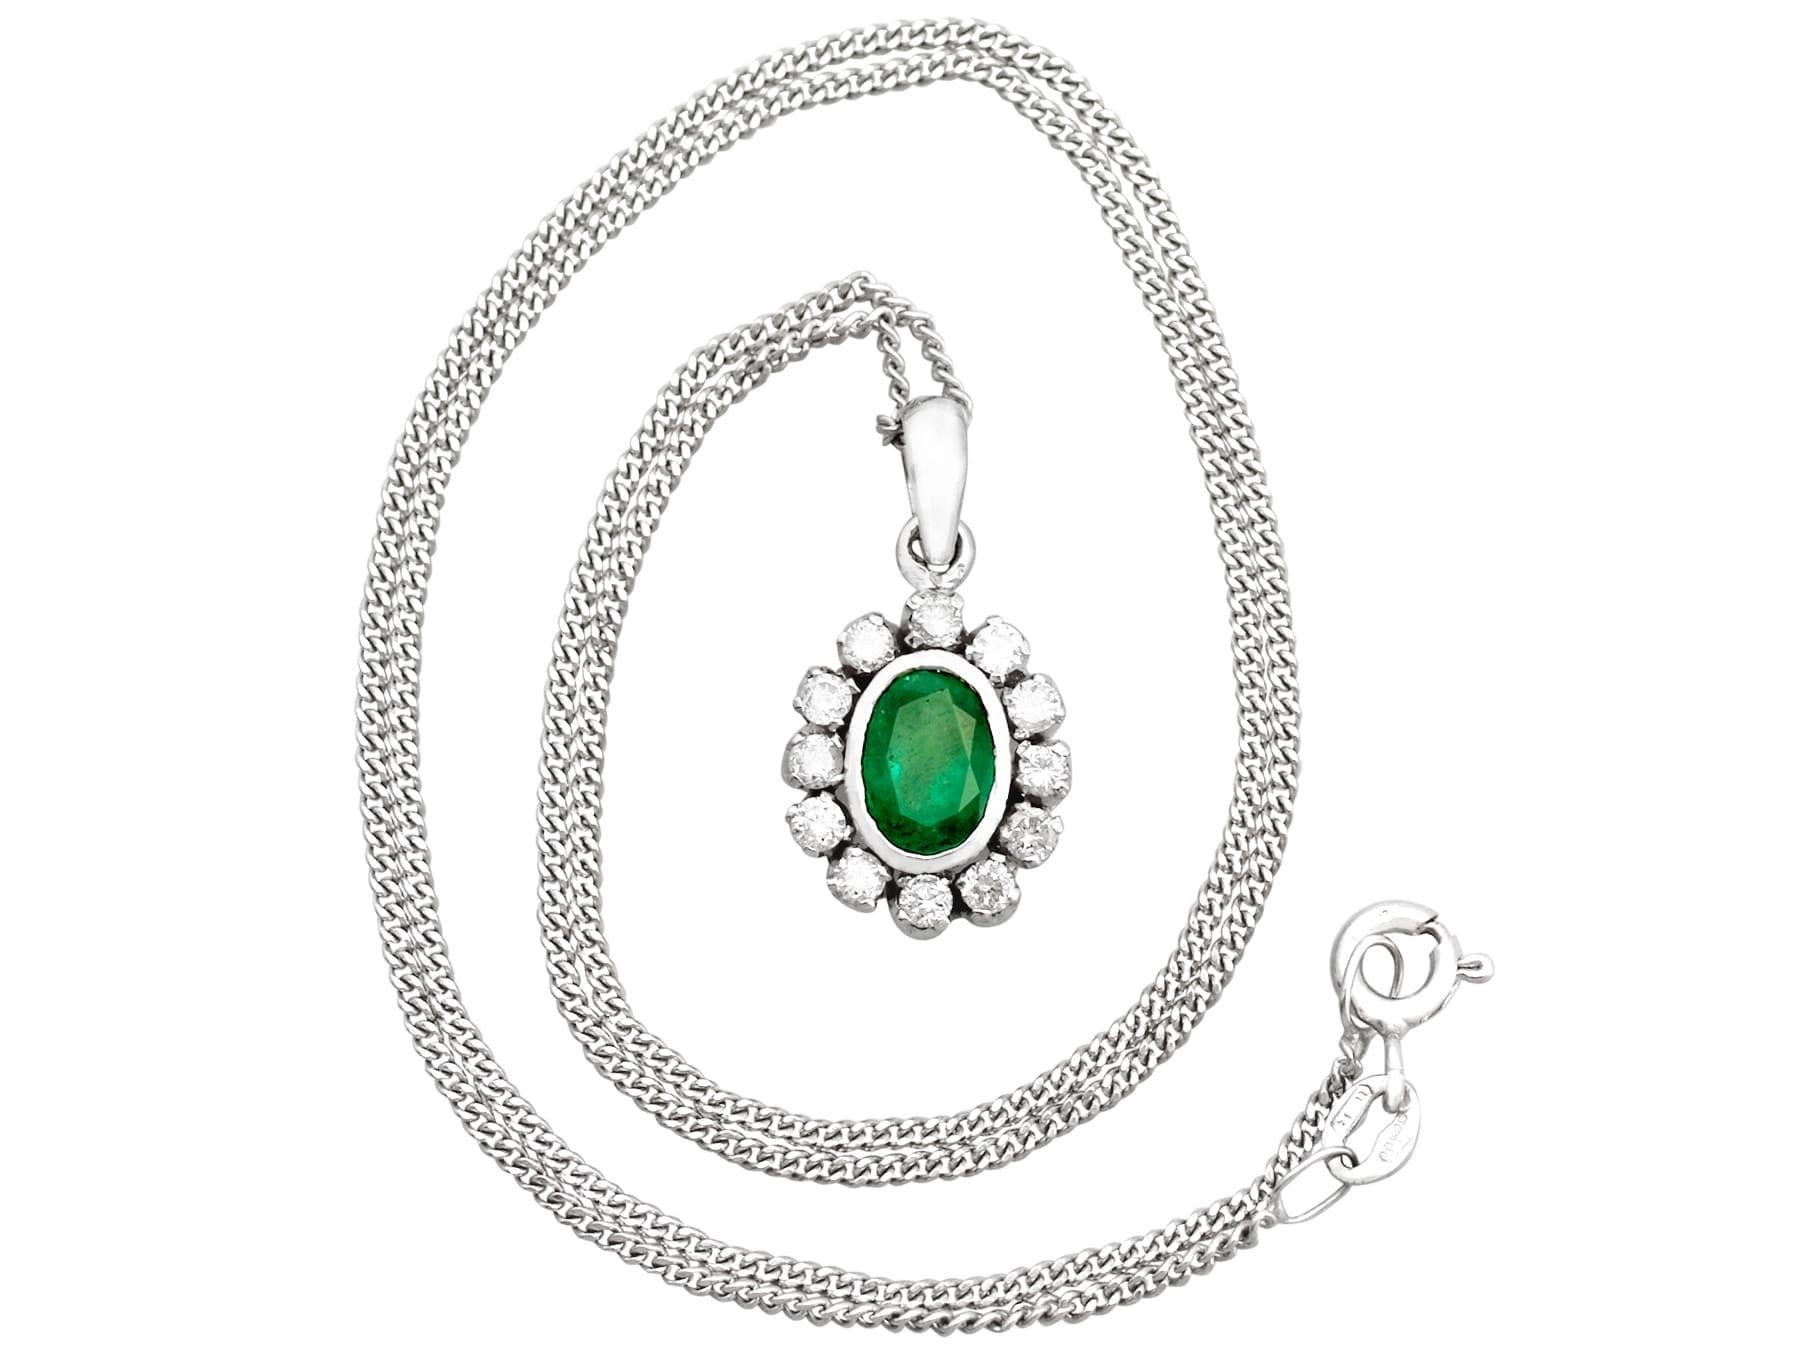 A fine and impressive 1.02 carat emerald and 0.48 carat diamond, 18 karat white gold cluster pendant; part of our diverse vintage jewelry collections.

This fine and impressive vintage emerald and diamond pendant has been crafted in 18k white